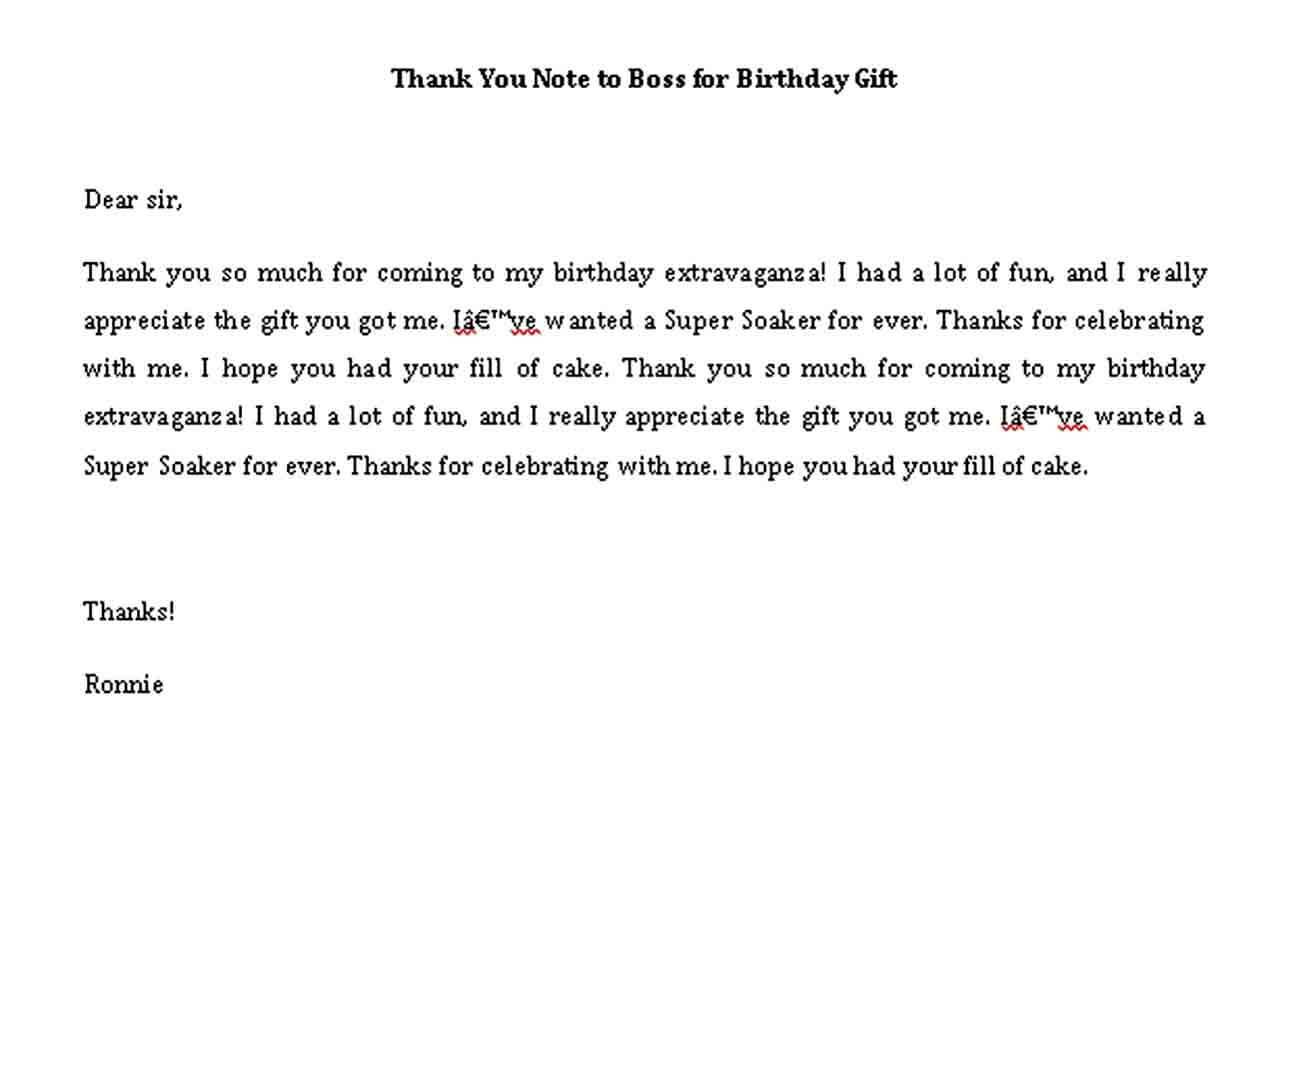 thank you note to boss for birthday gift